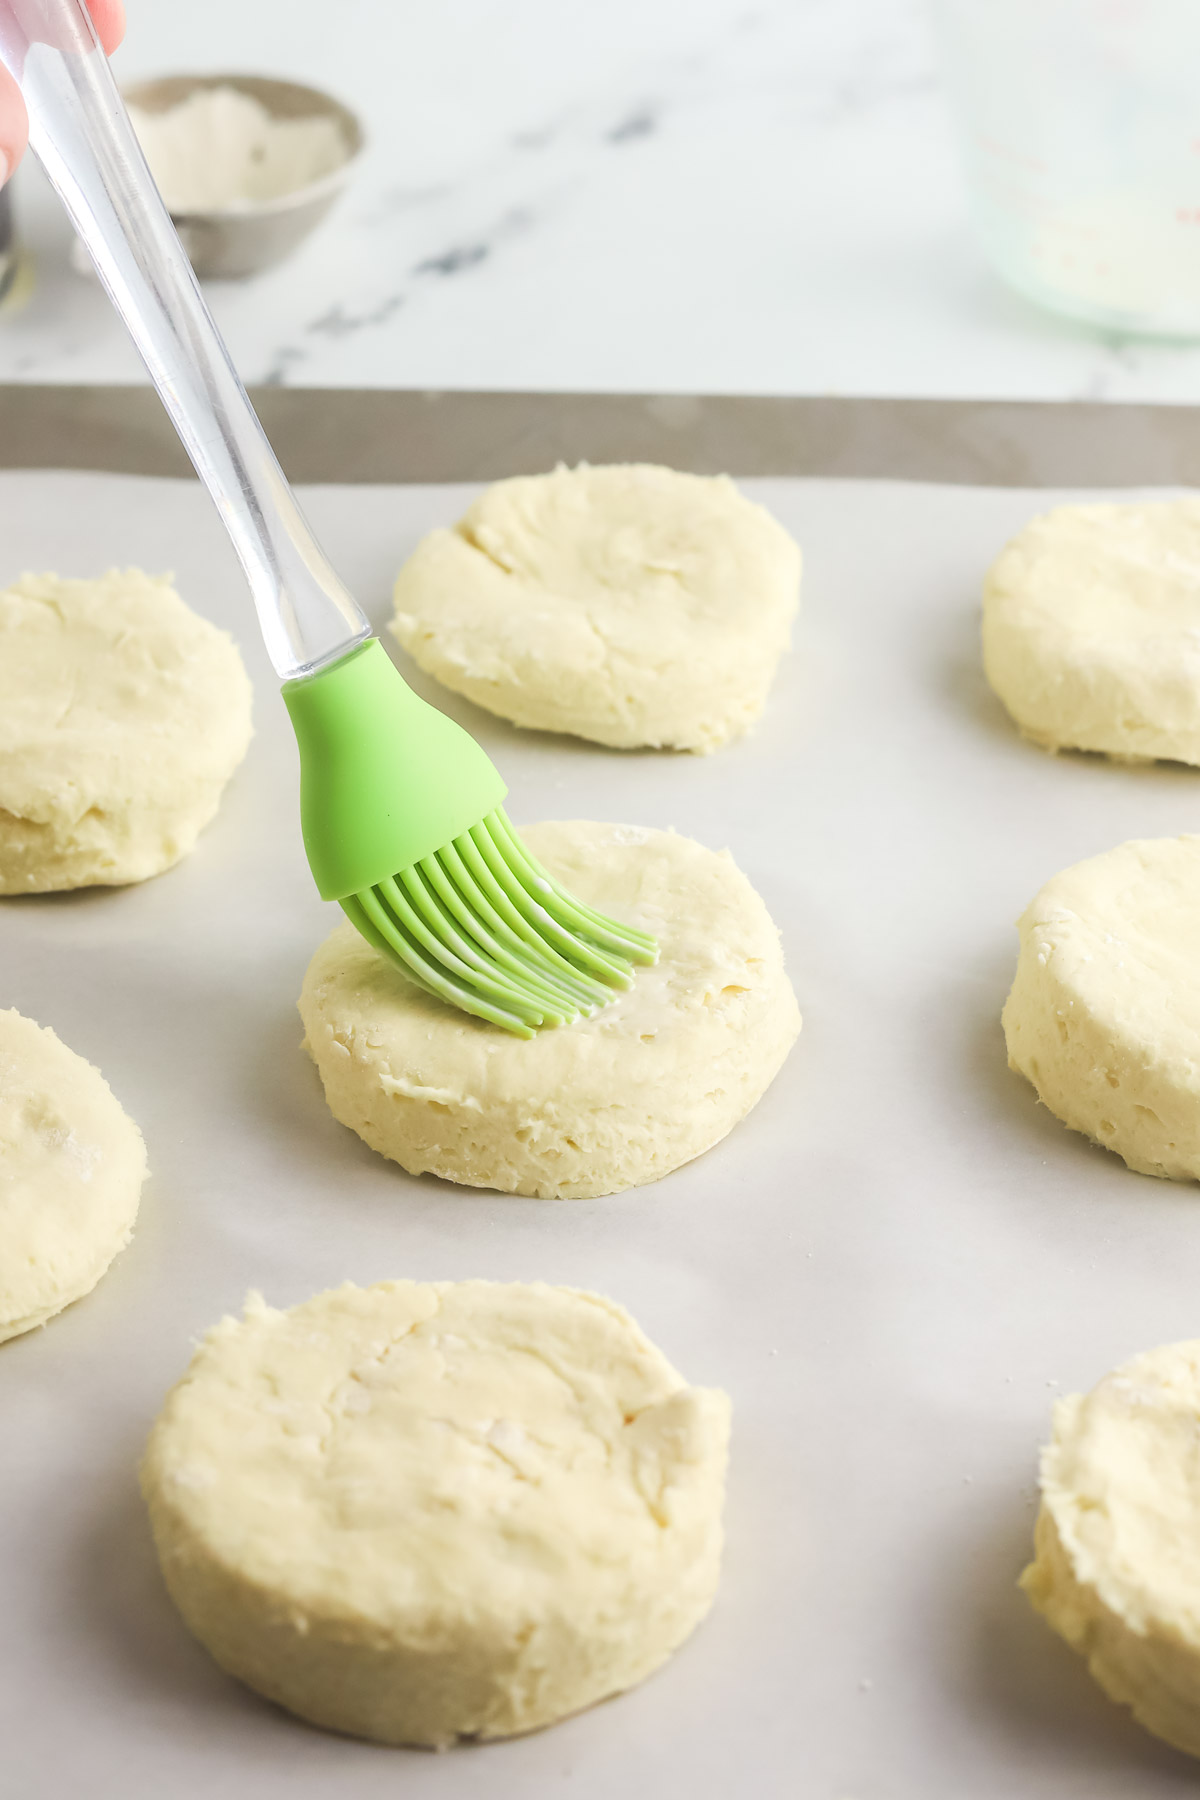 silicone brush brushing on heavy cream on top of cream biscuits before baking